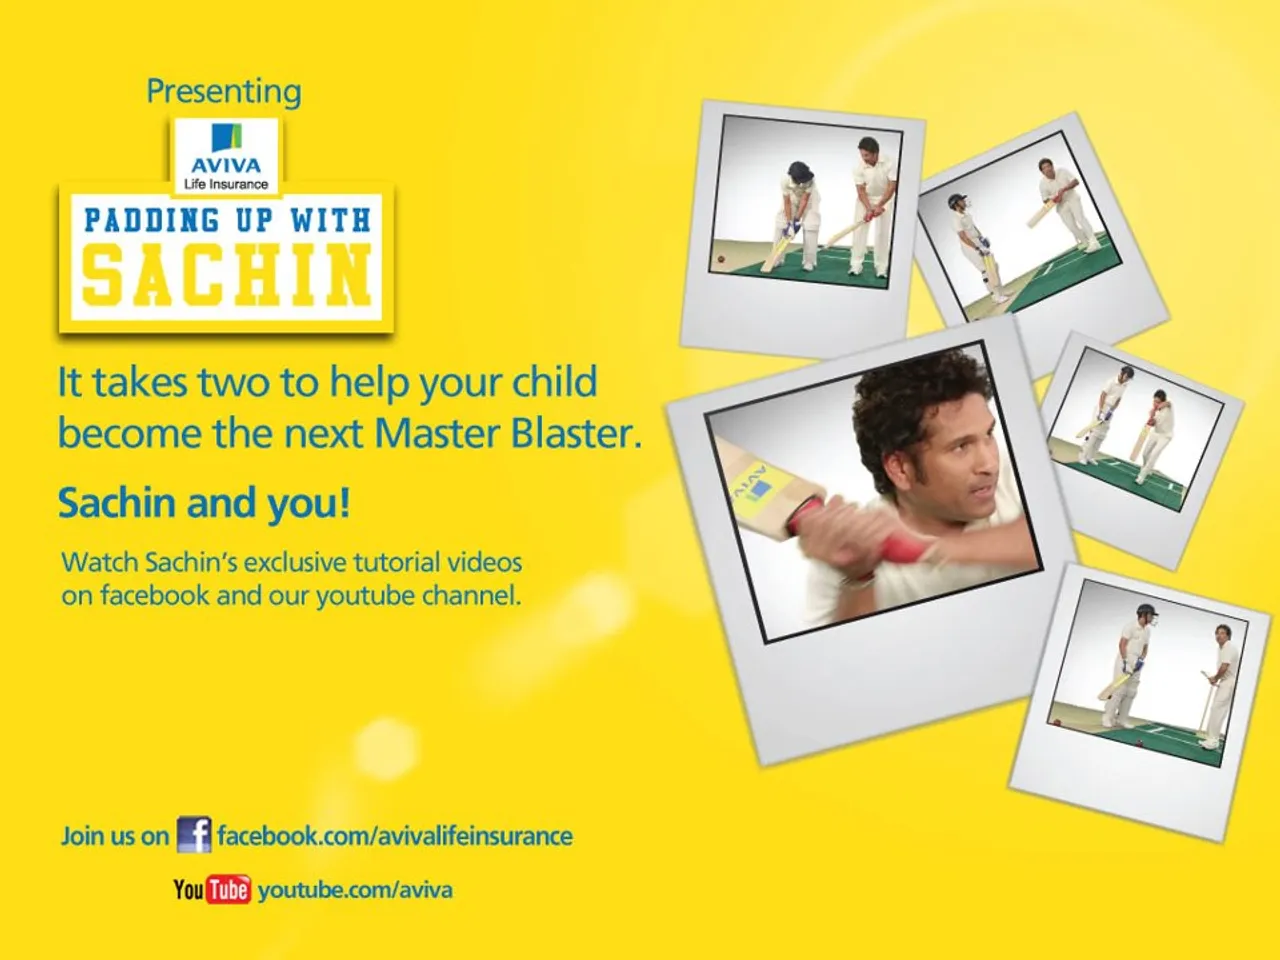 Social Media Campaign Review: Aviva India Padding Up with Sachin